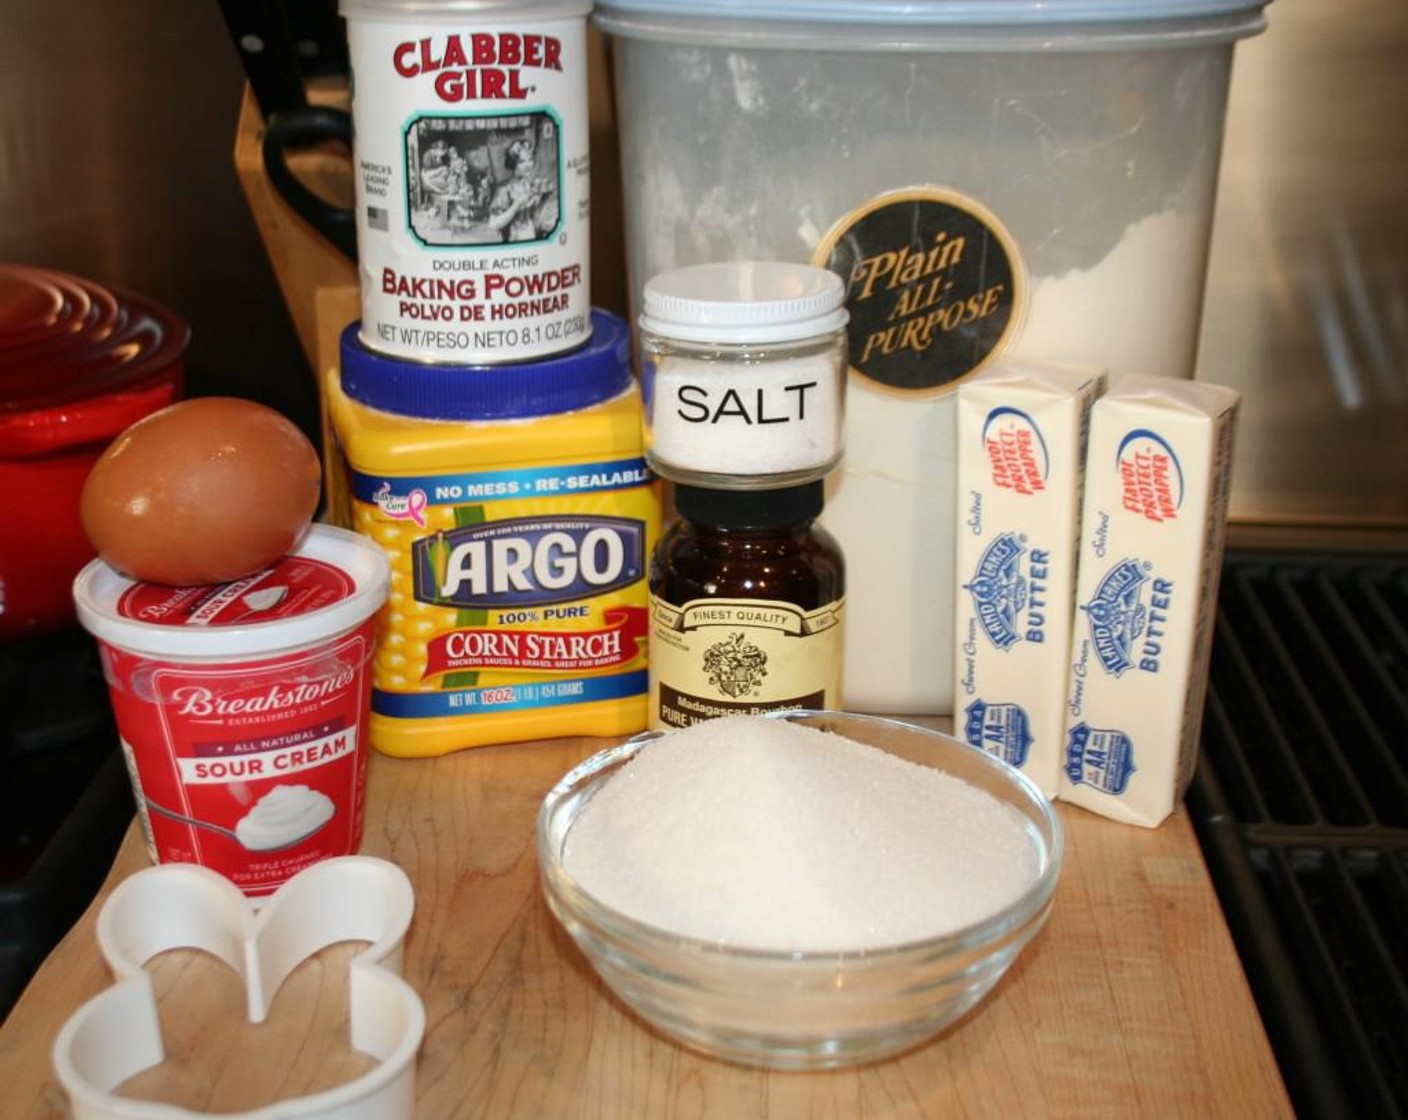 step 1 In a standing mixer cream Butter (1 cup), Granulated Sugar (1 1/4 cups), Salt (1 tsp) and Baking Powder (1/2 Tbsp) until light and fluffy. Then add Vanilla Extract (1/2 Tbsp) and Farmhouse Eggs® Large Brown Egg (1) beat well until blended light and fluffy.